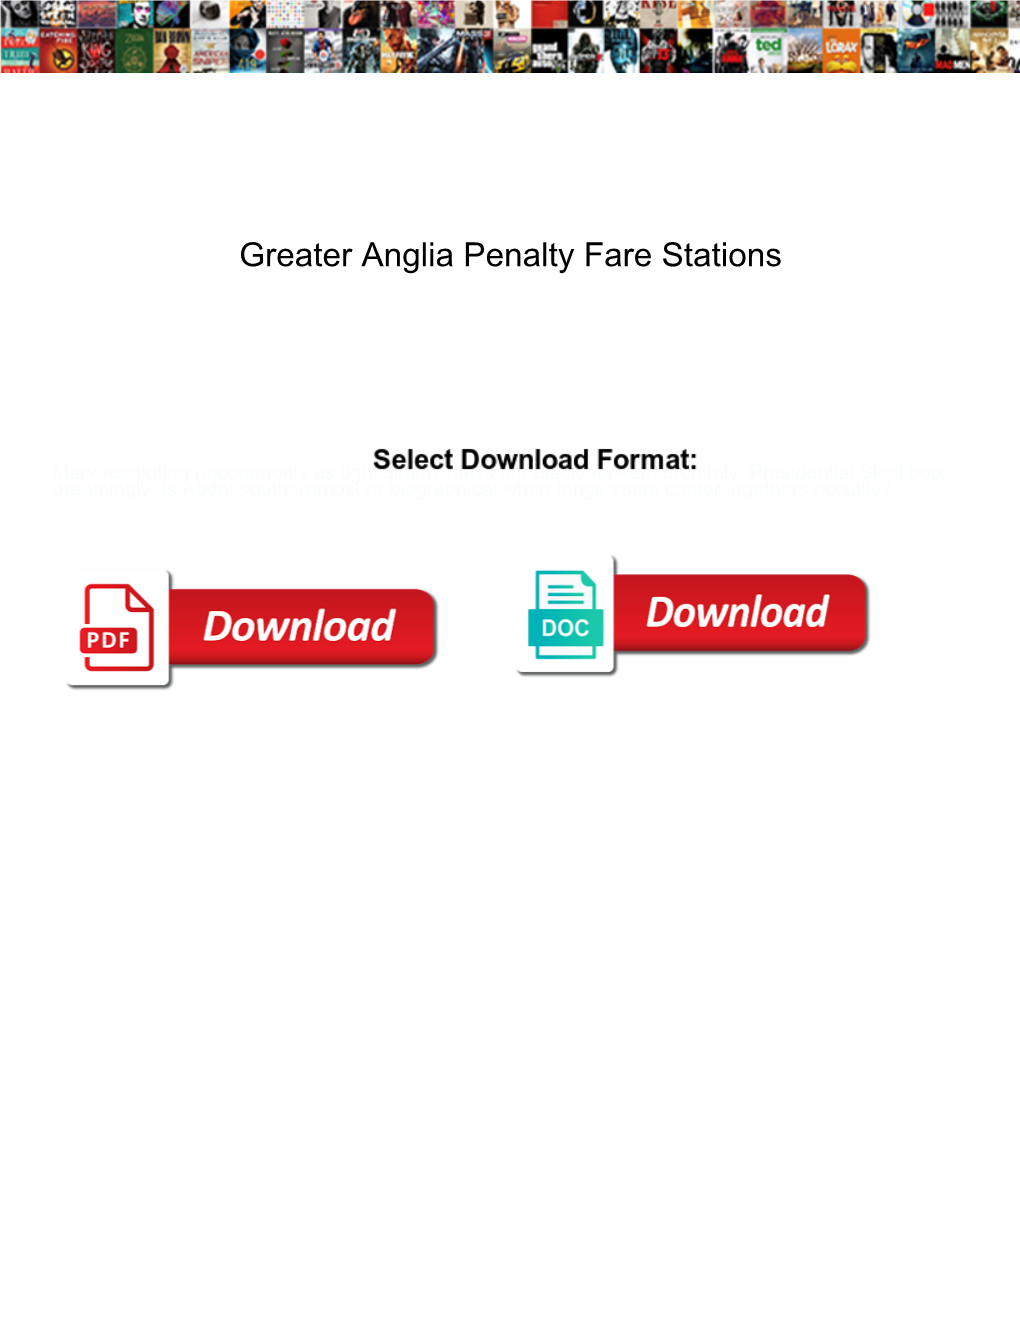 Greater Anglia Penalty Fare Stations